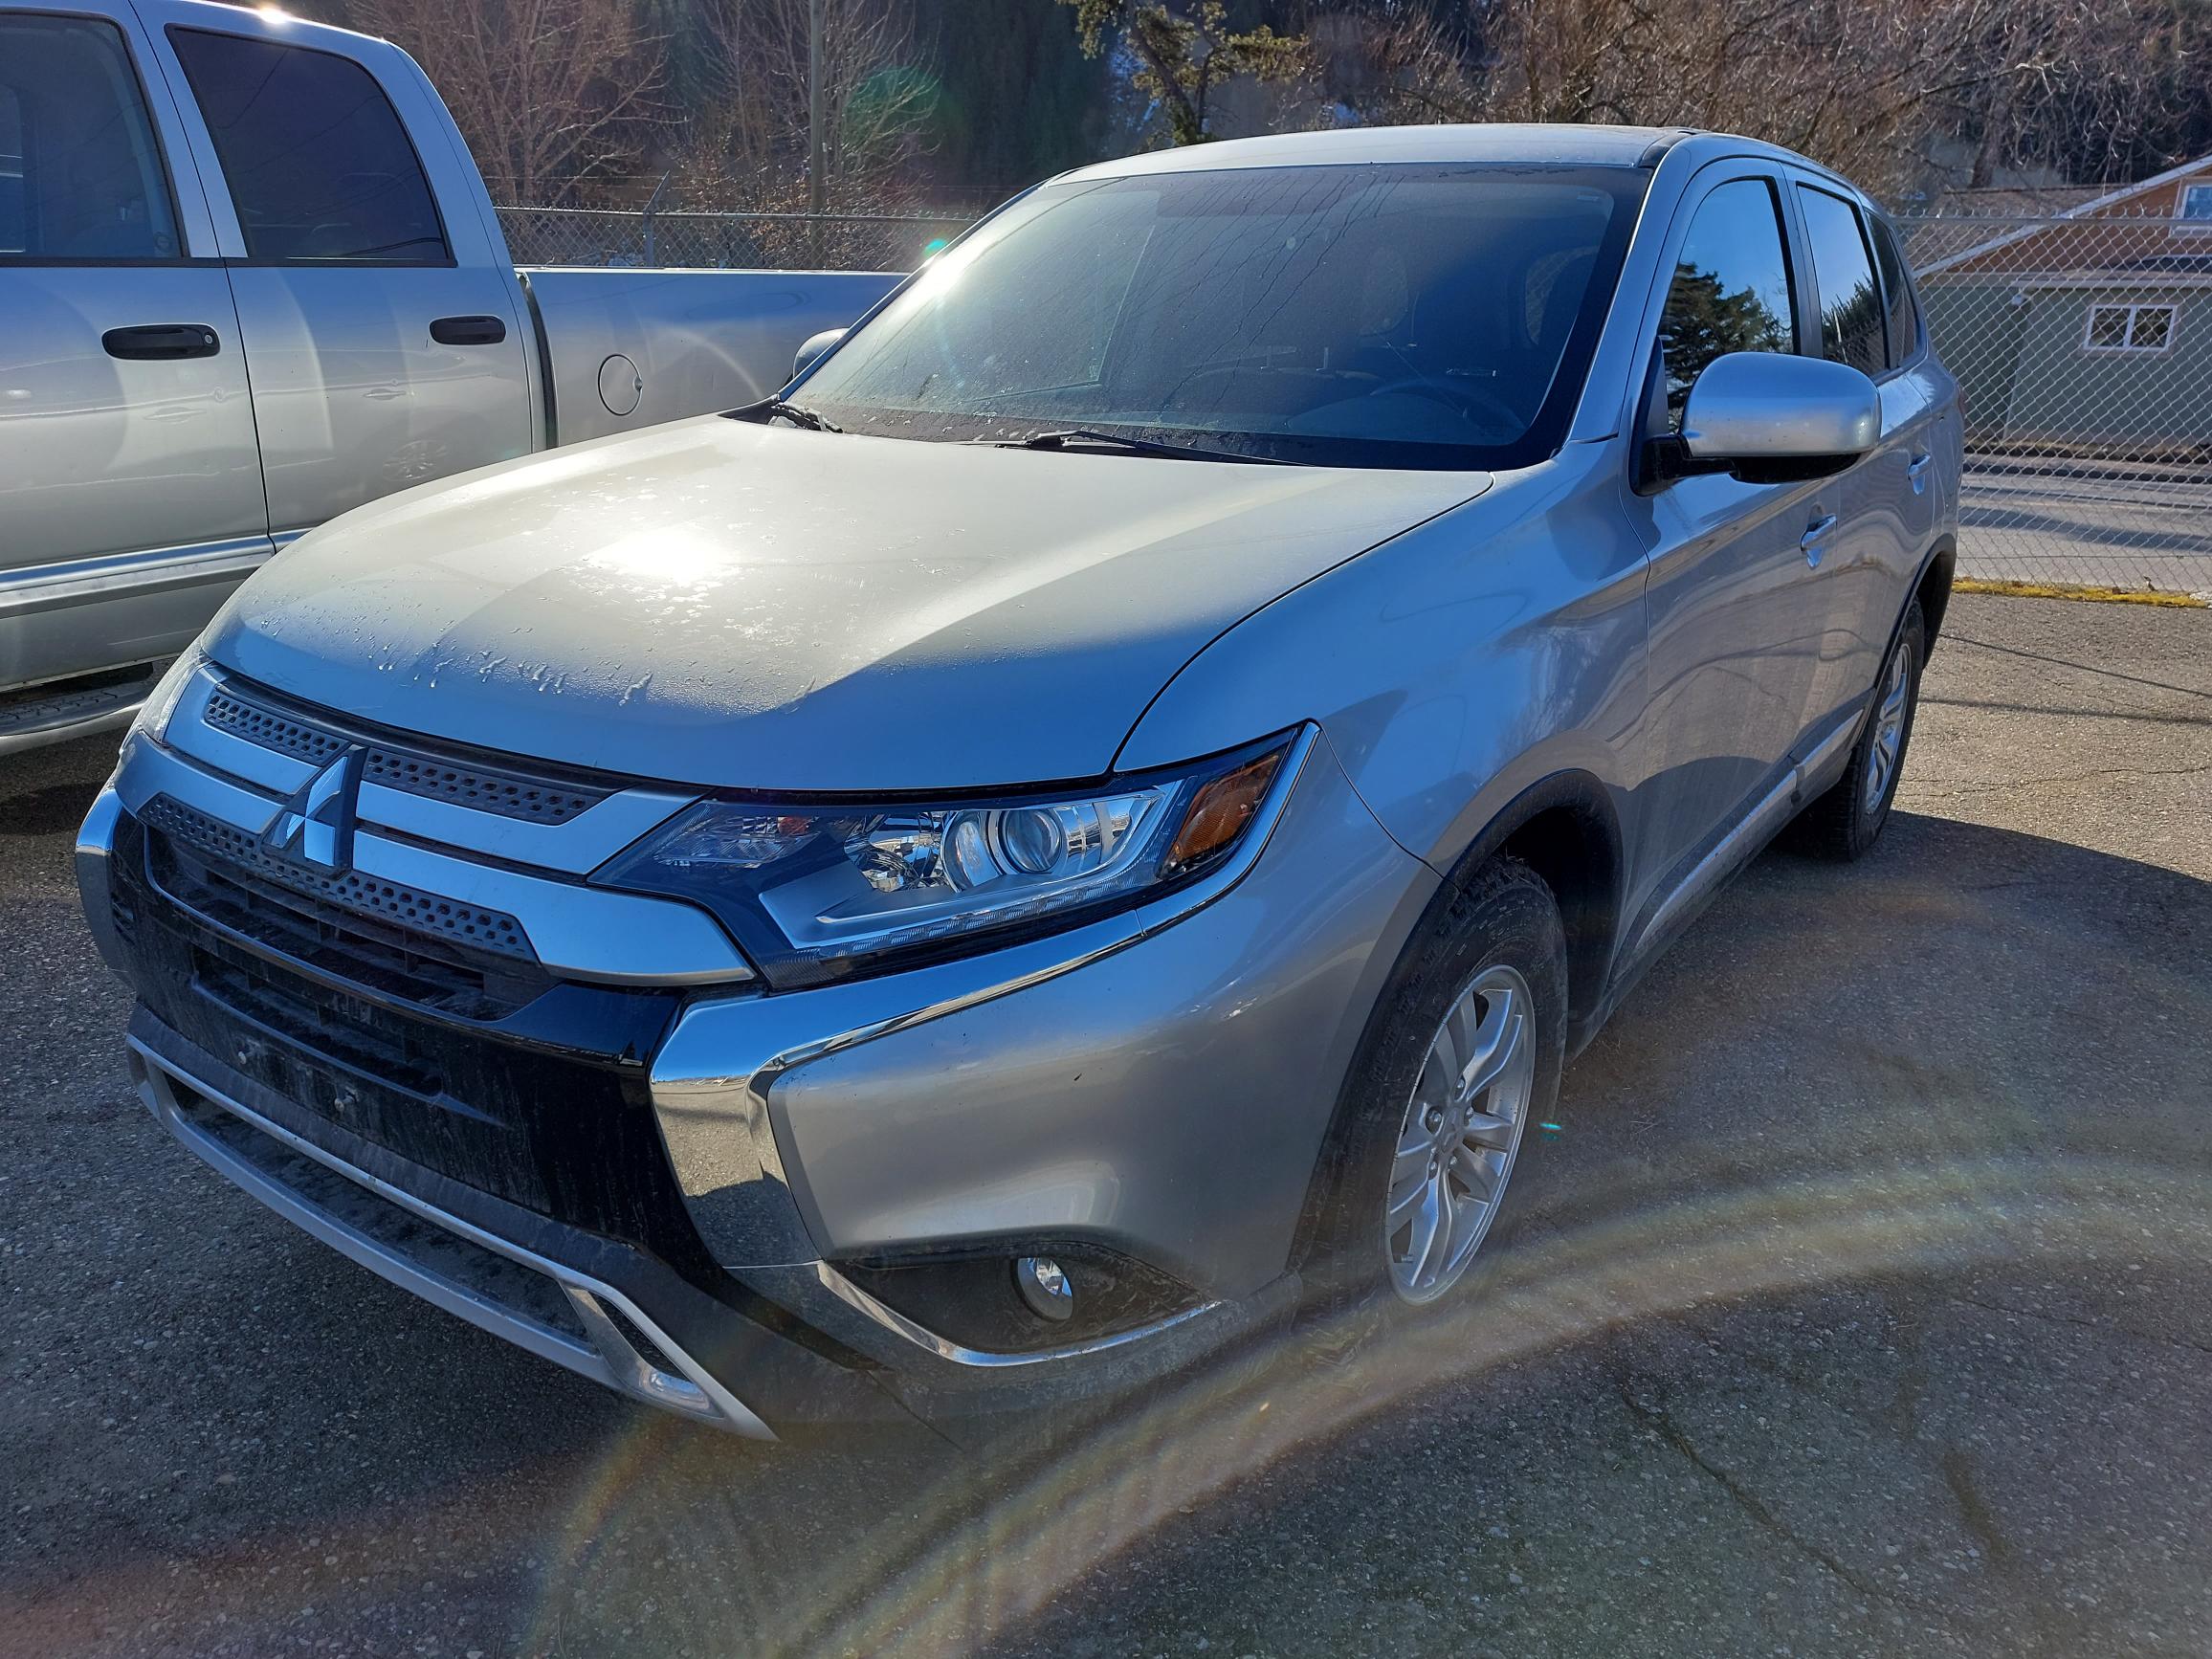 2020 Mitsubishi Outlander #B-PG-0584 Re-Listed Located in Prince George